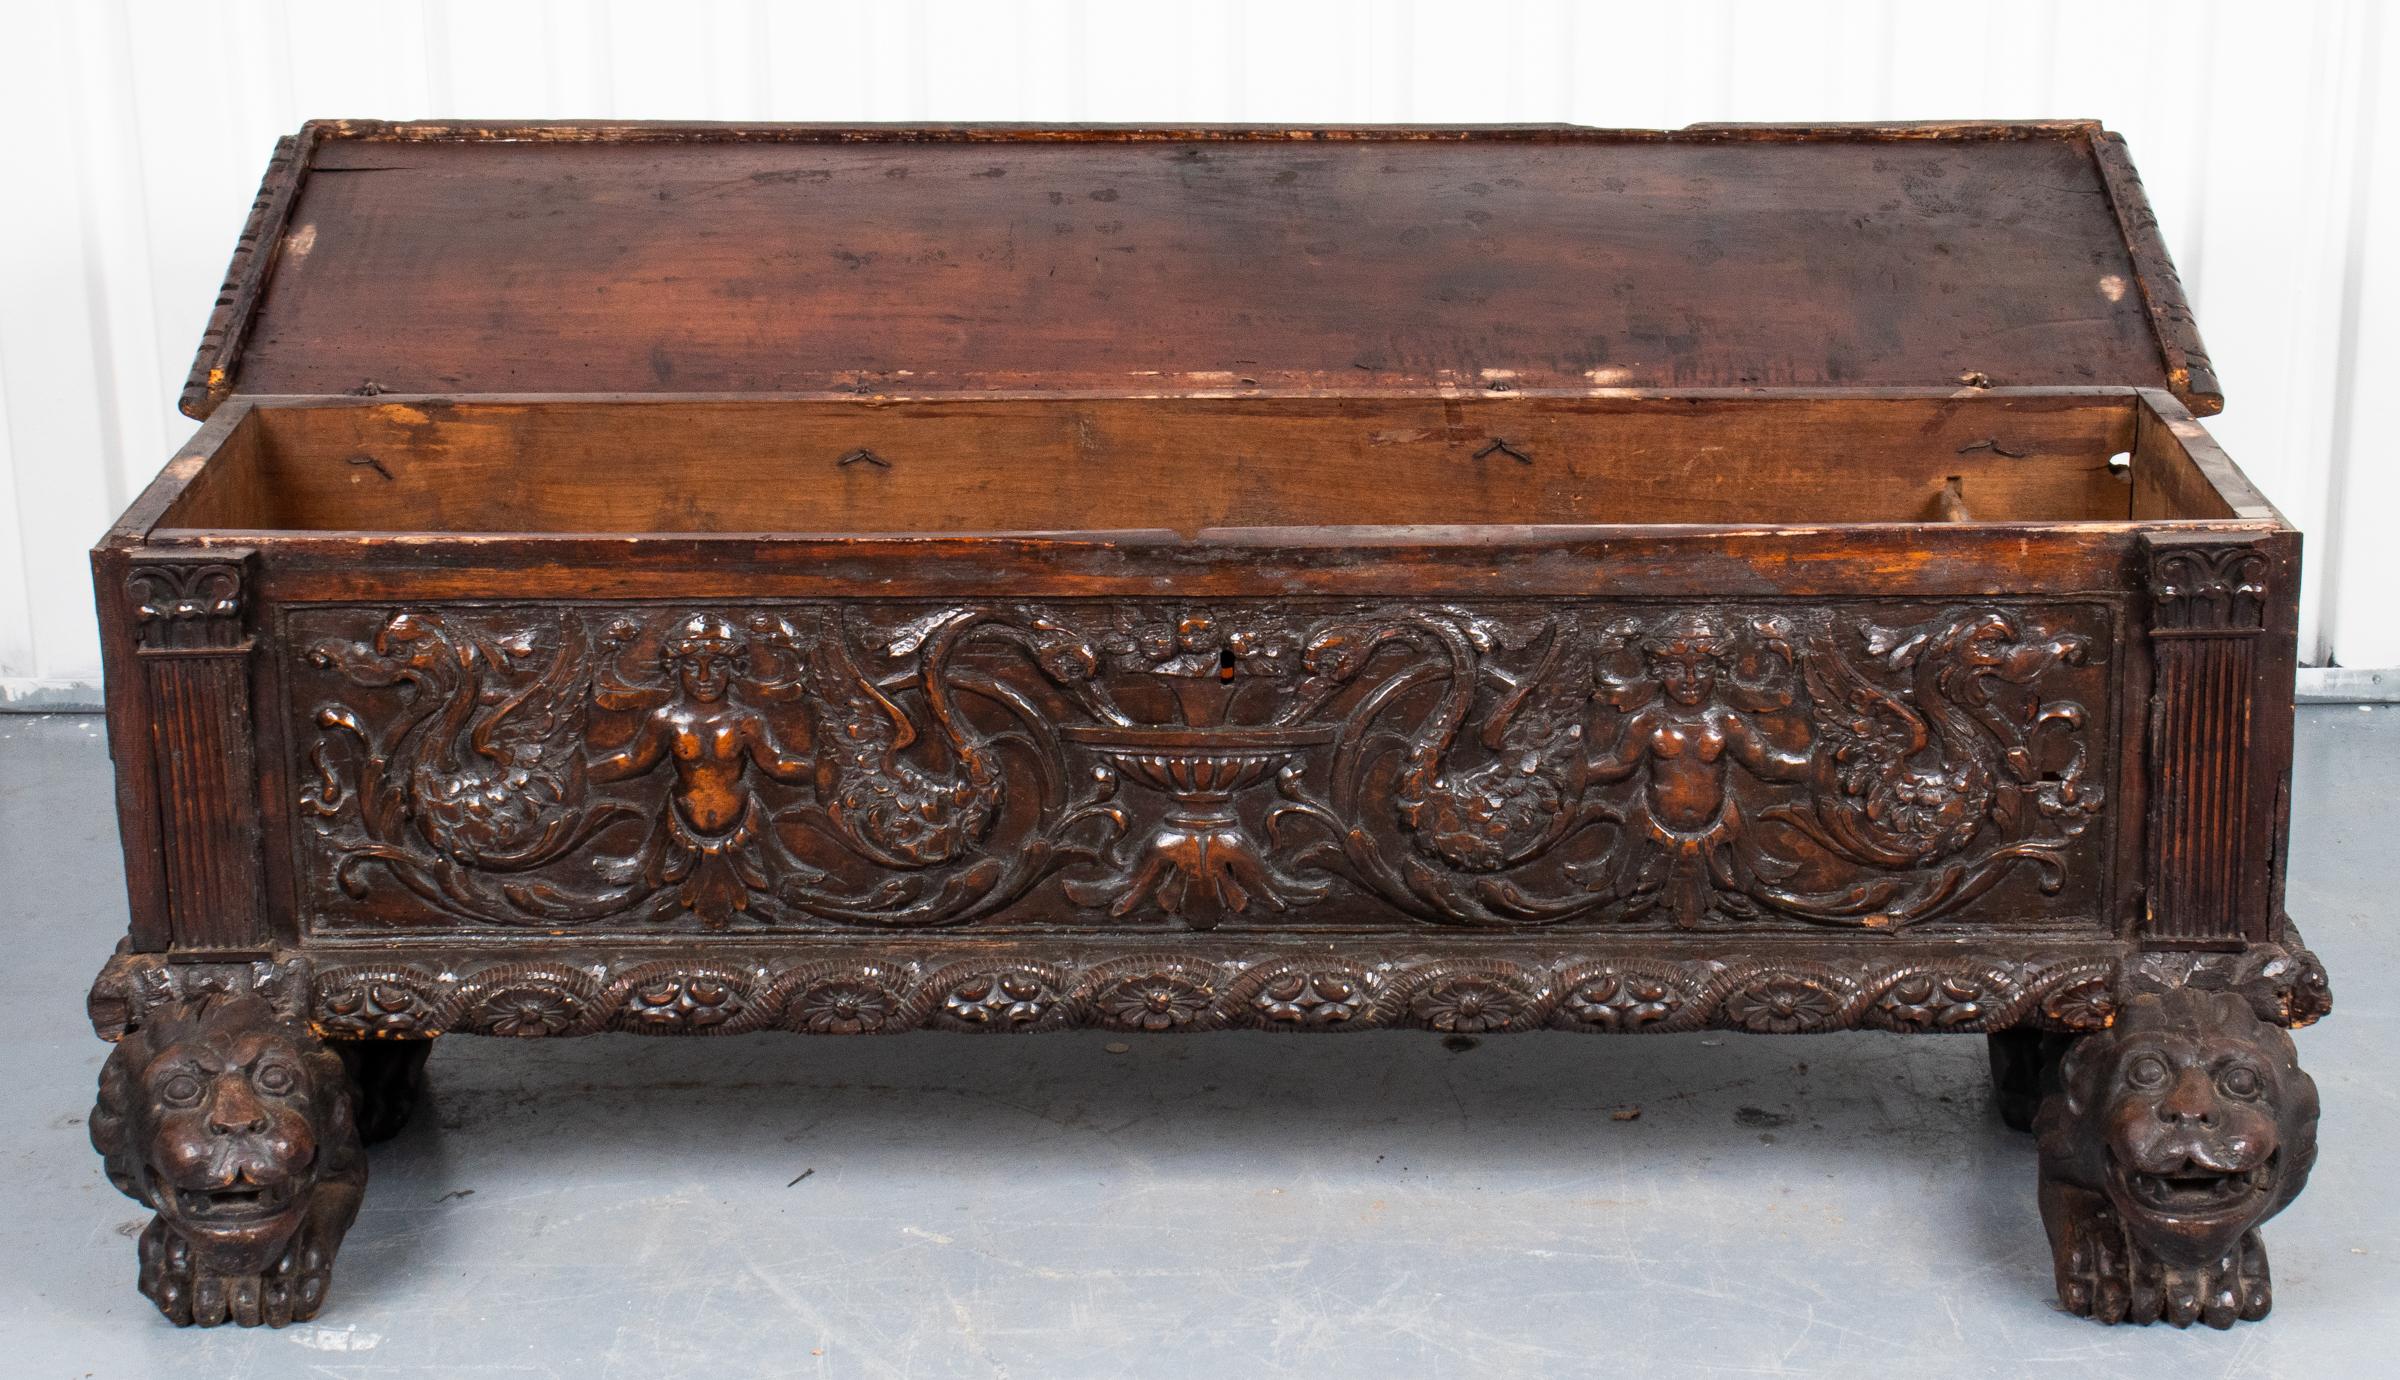 Antique Italian Renaissance revival oak cassone, the chest carved throughout with Classical motifs and raised on lion-head bracket feet. Measures: 24